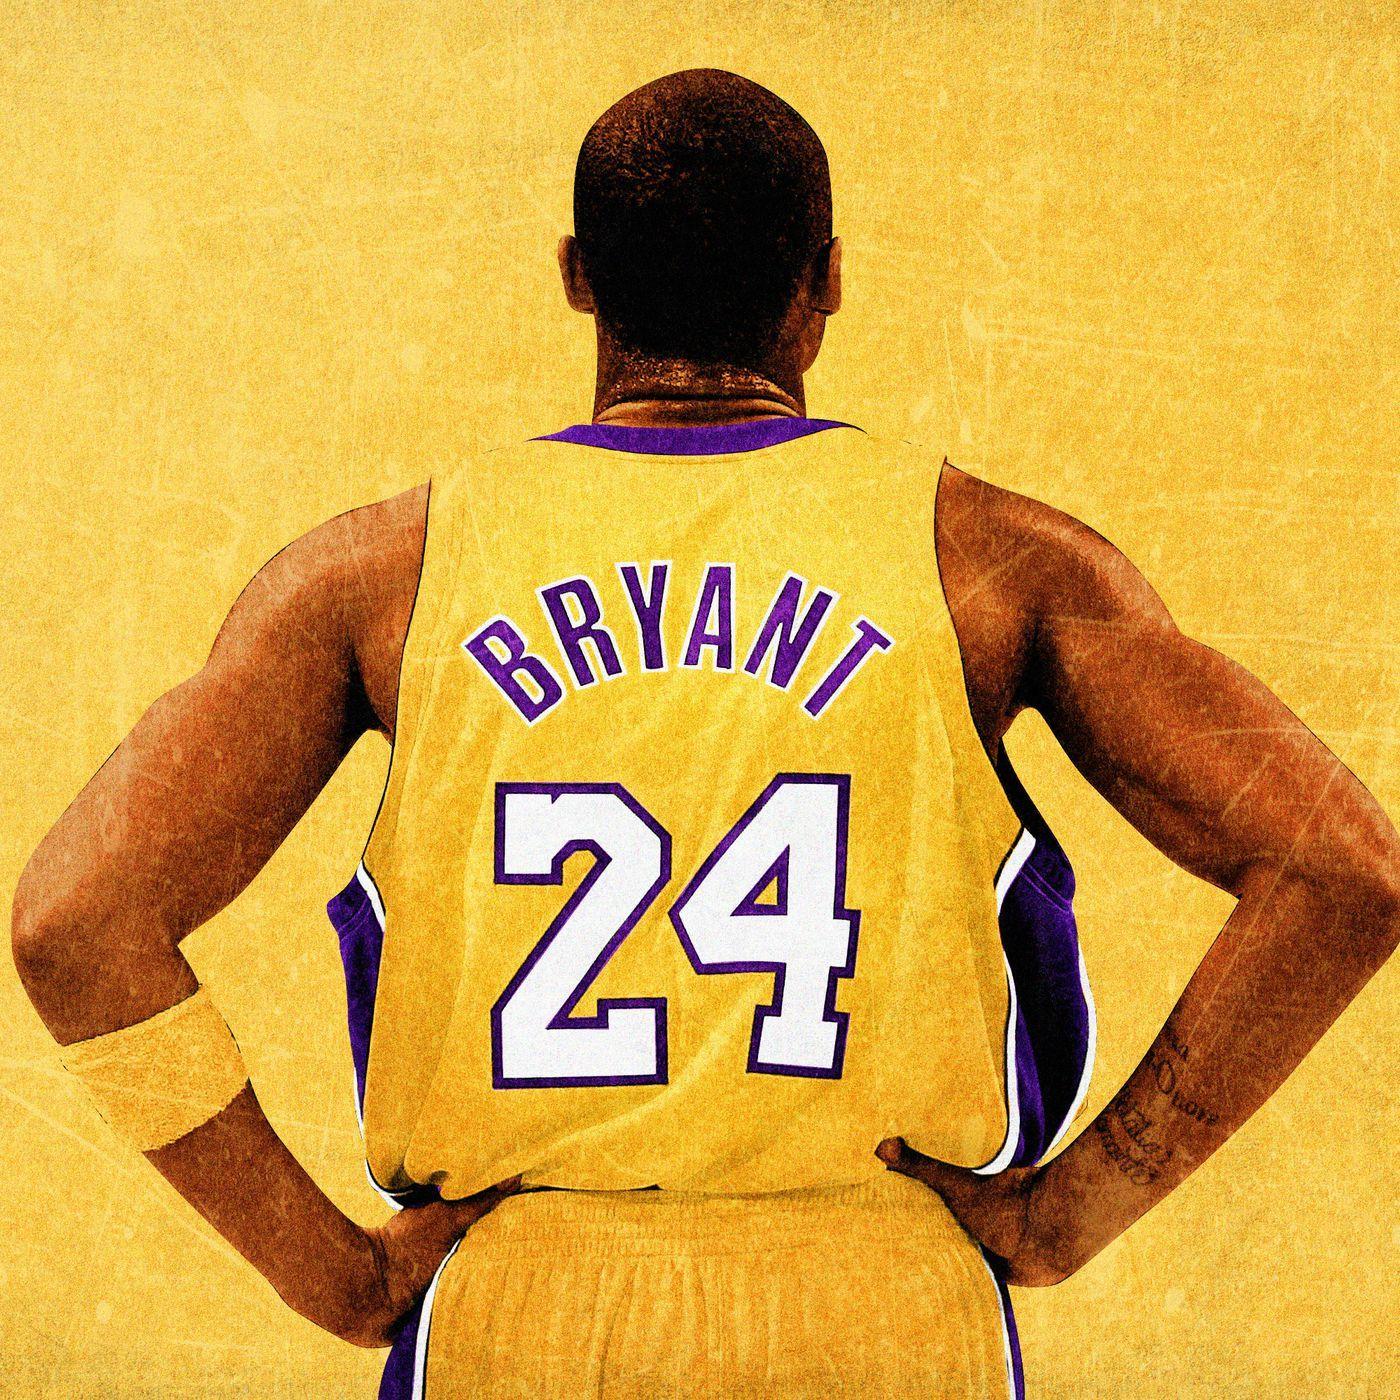 Buy Mamba Mentality Rest at the End Printable Wall Art Online in India   Etsy